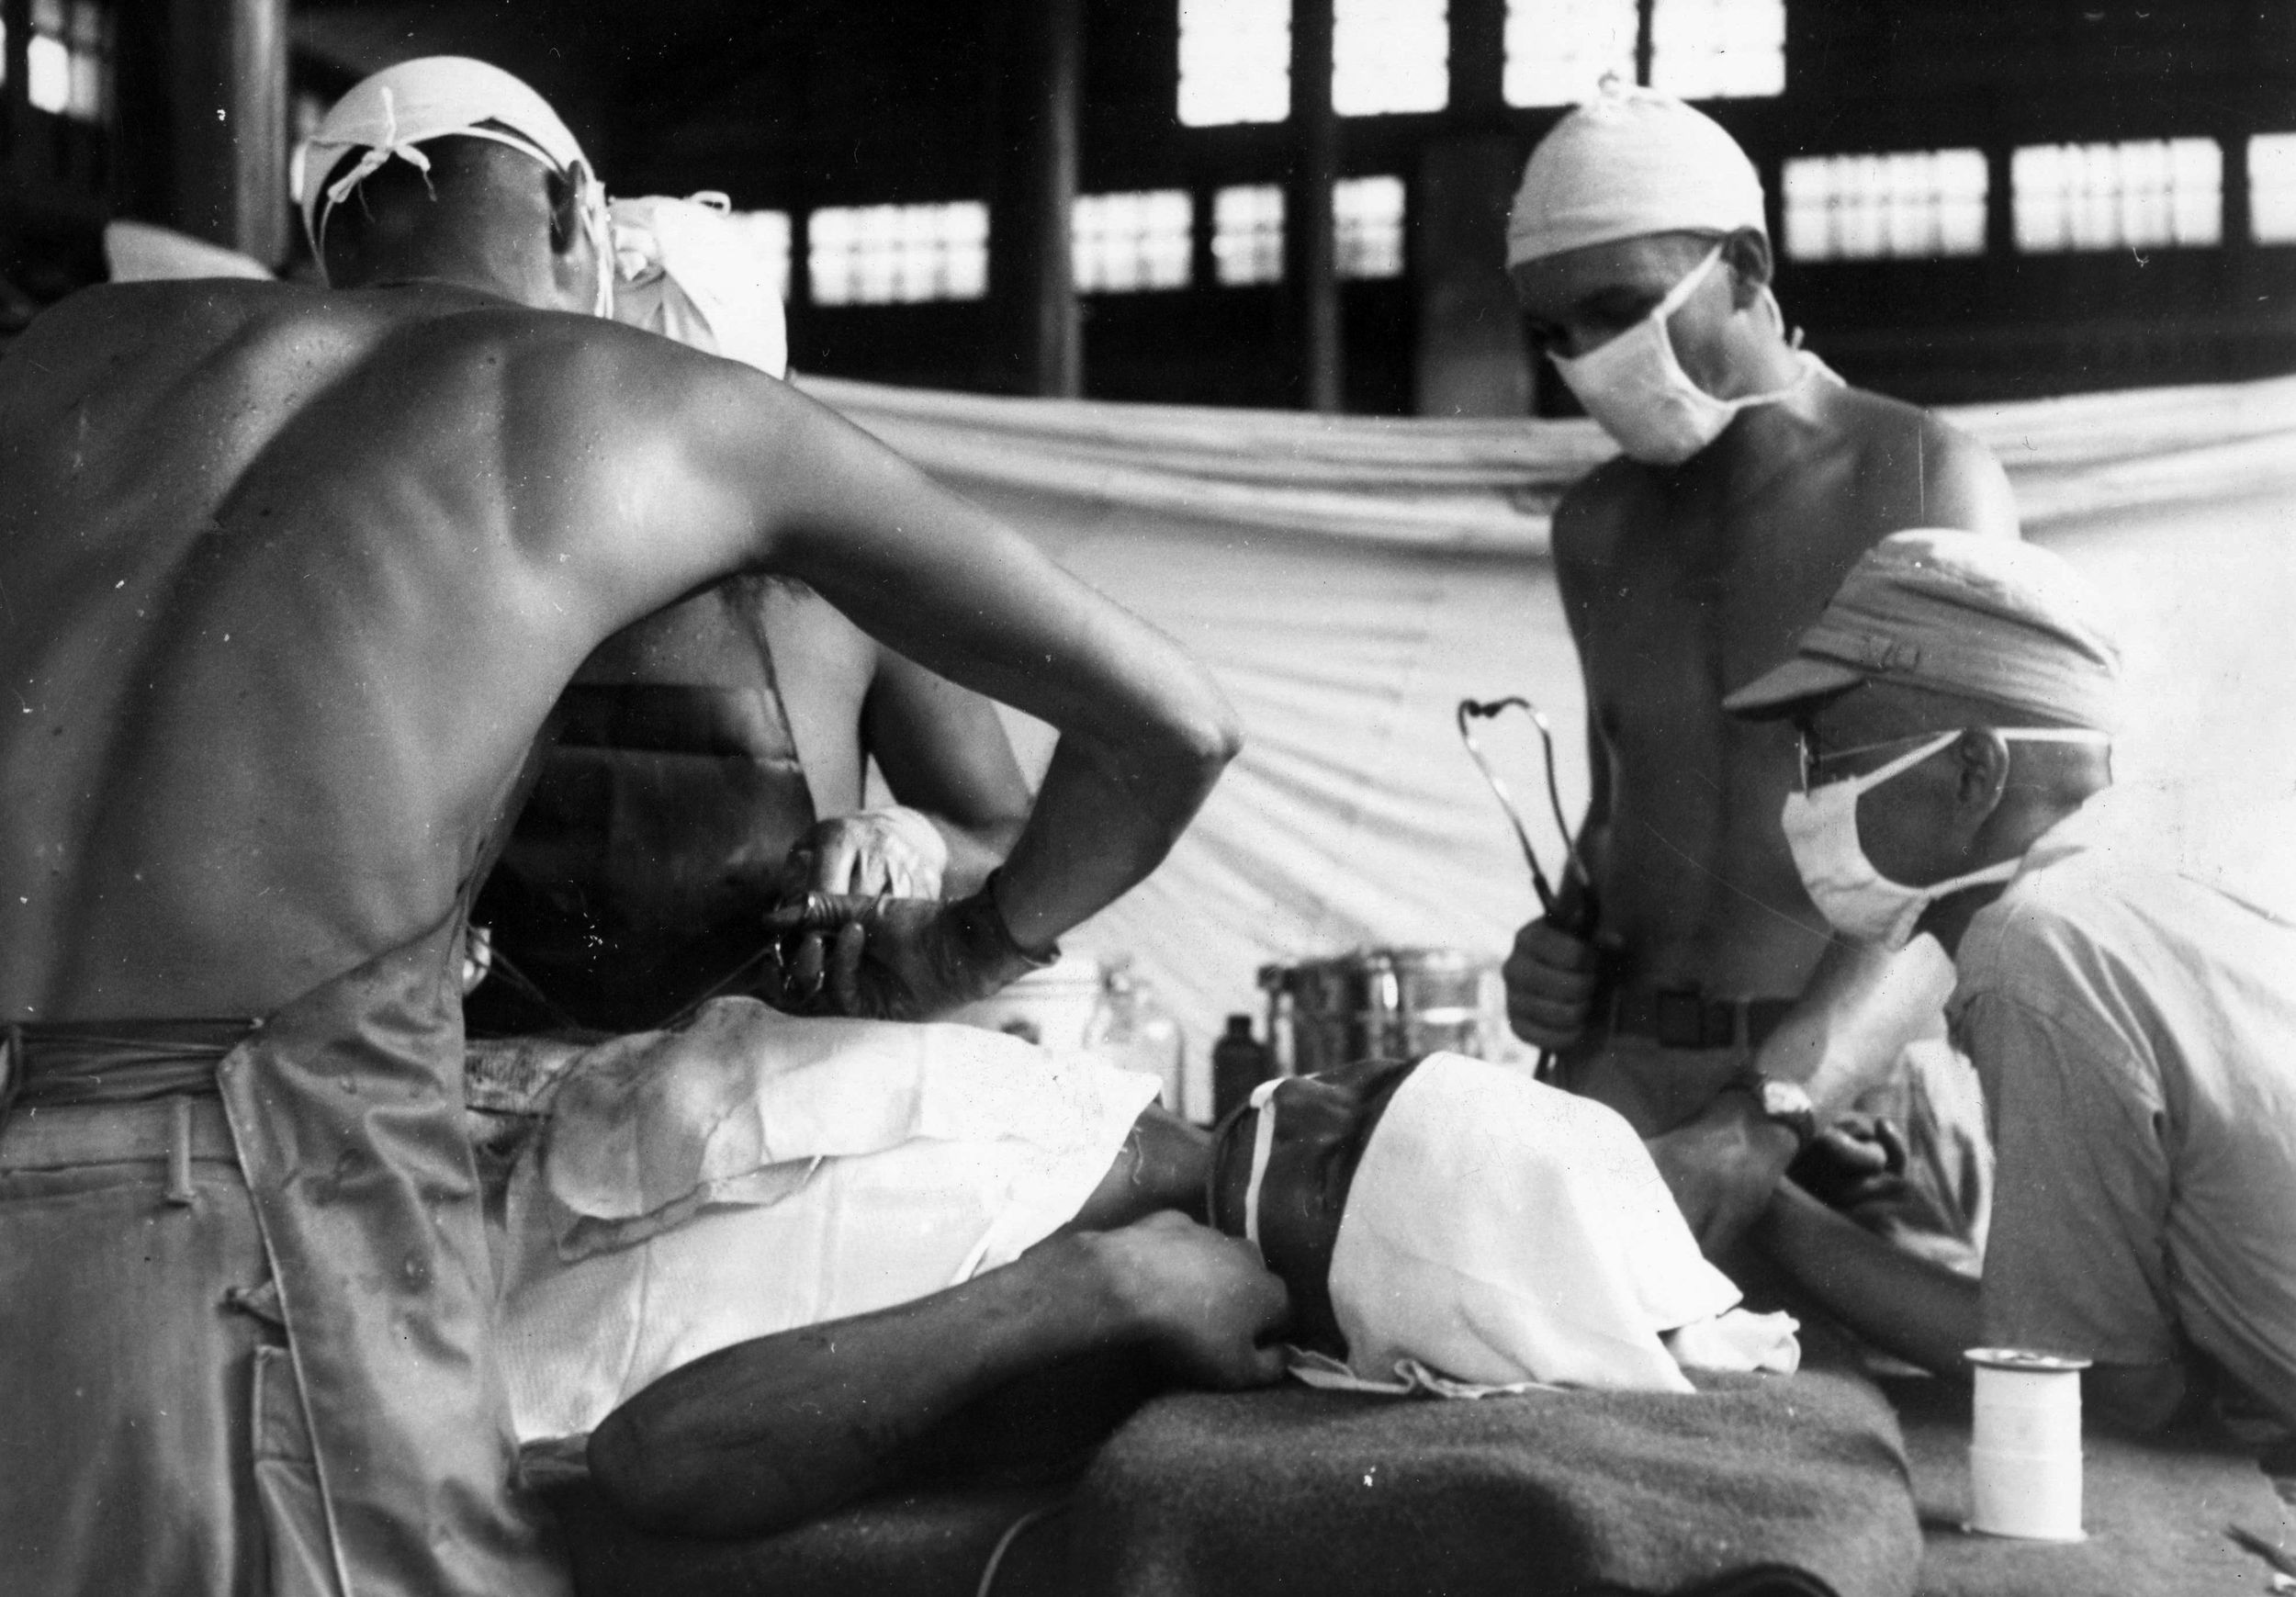 An American surgeon and his attending orderlies perform surgery on a wounded Chinese soldier in the recently liberated Chinese city of Kwelin. This operation is taking place at a Portable Surgical Hospital, a facility established in close proximity to the front lines.